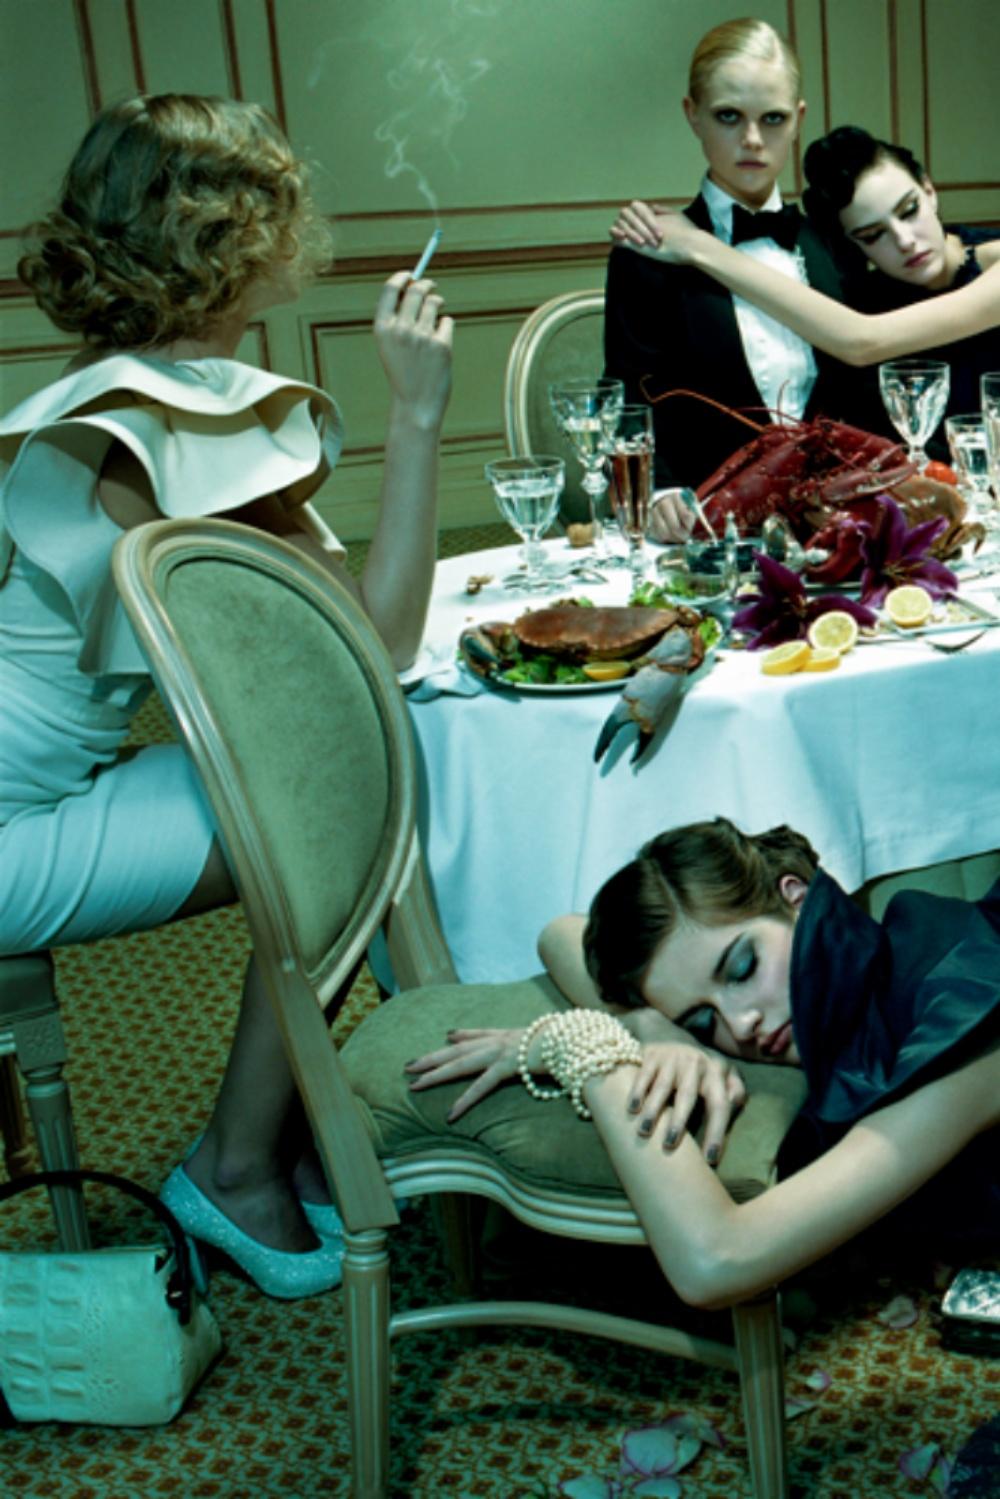 Miles ALDRIDGE (*1964, Great Britain)
Dinner Party #7, 2009
Chromogenic print
Image 101.5 x 152.5 (40 x 60 in.) 
Sheet 113.5 x 164.5 cm (44 5/8 x 64 3/4 in.)
Edition of 6, plus 2 AP; Ed. 4/6
Print only

A fiercely original photographer, Miles